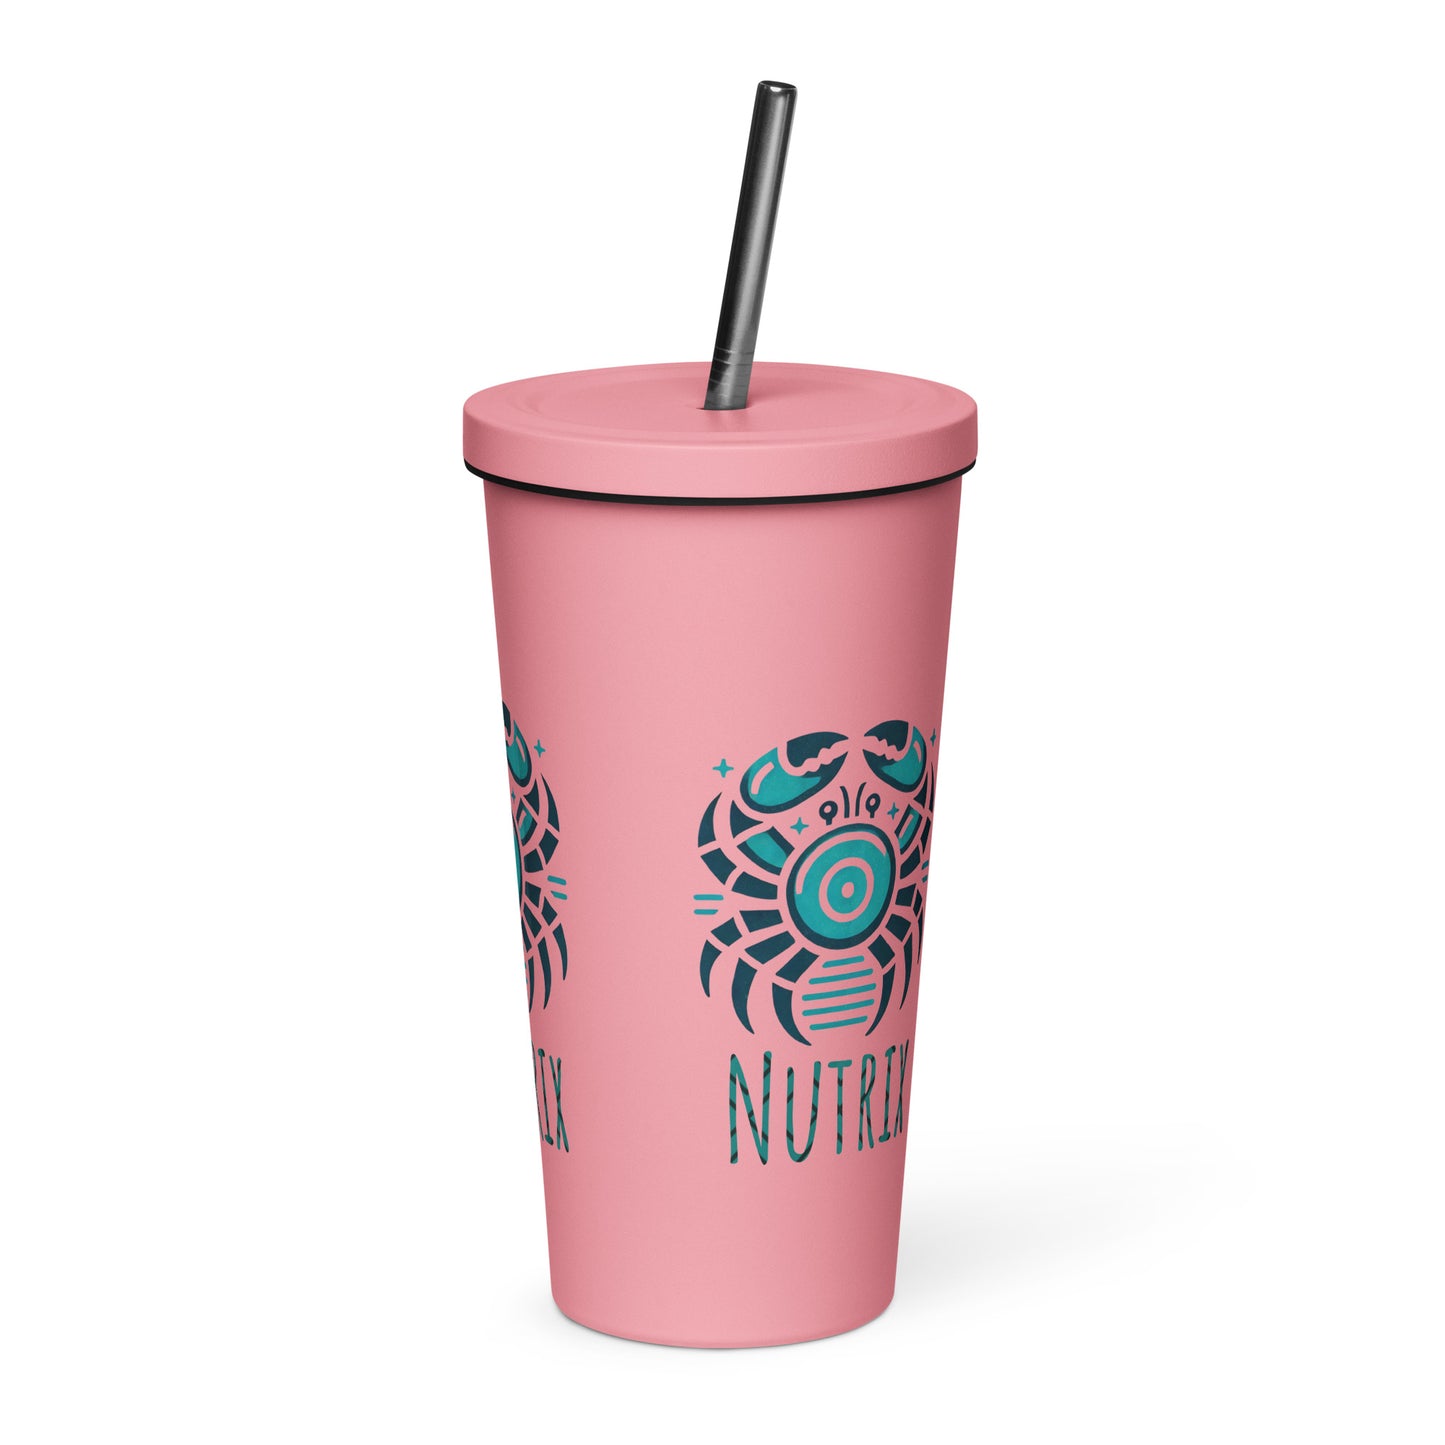 Nutrix Insulated tumbler with a straw